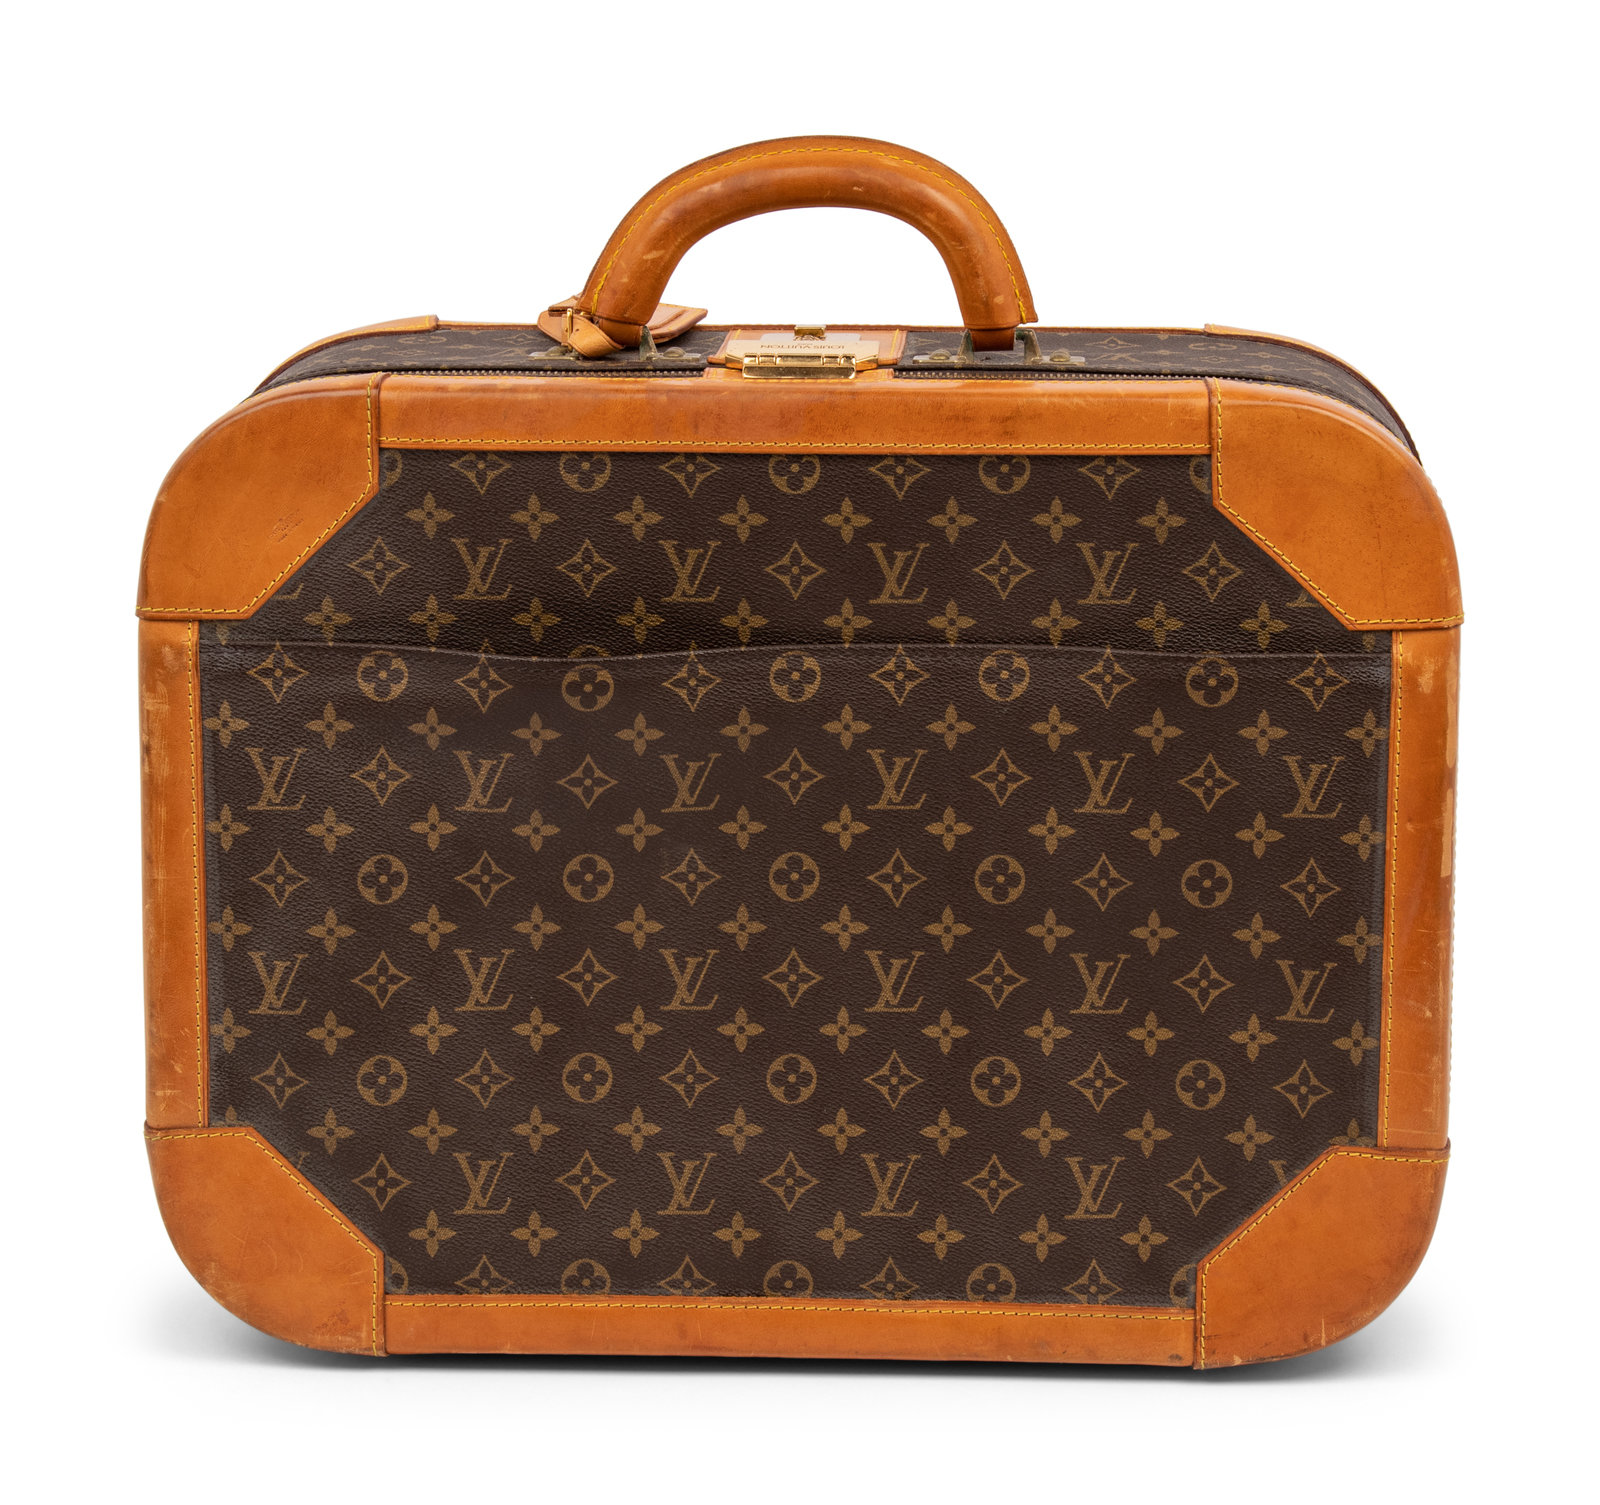 Sold at Auction: Louis Vuitton, Louis Vuitton Hard Sided Leather